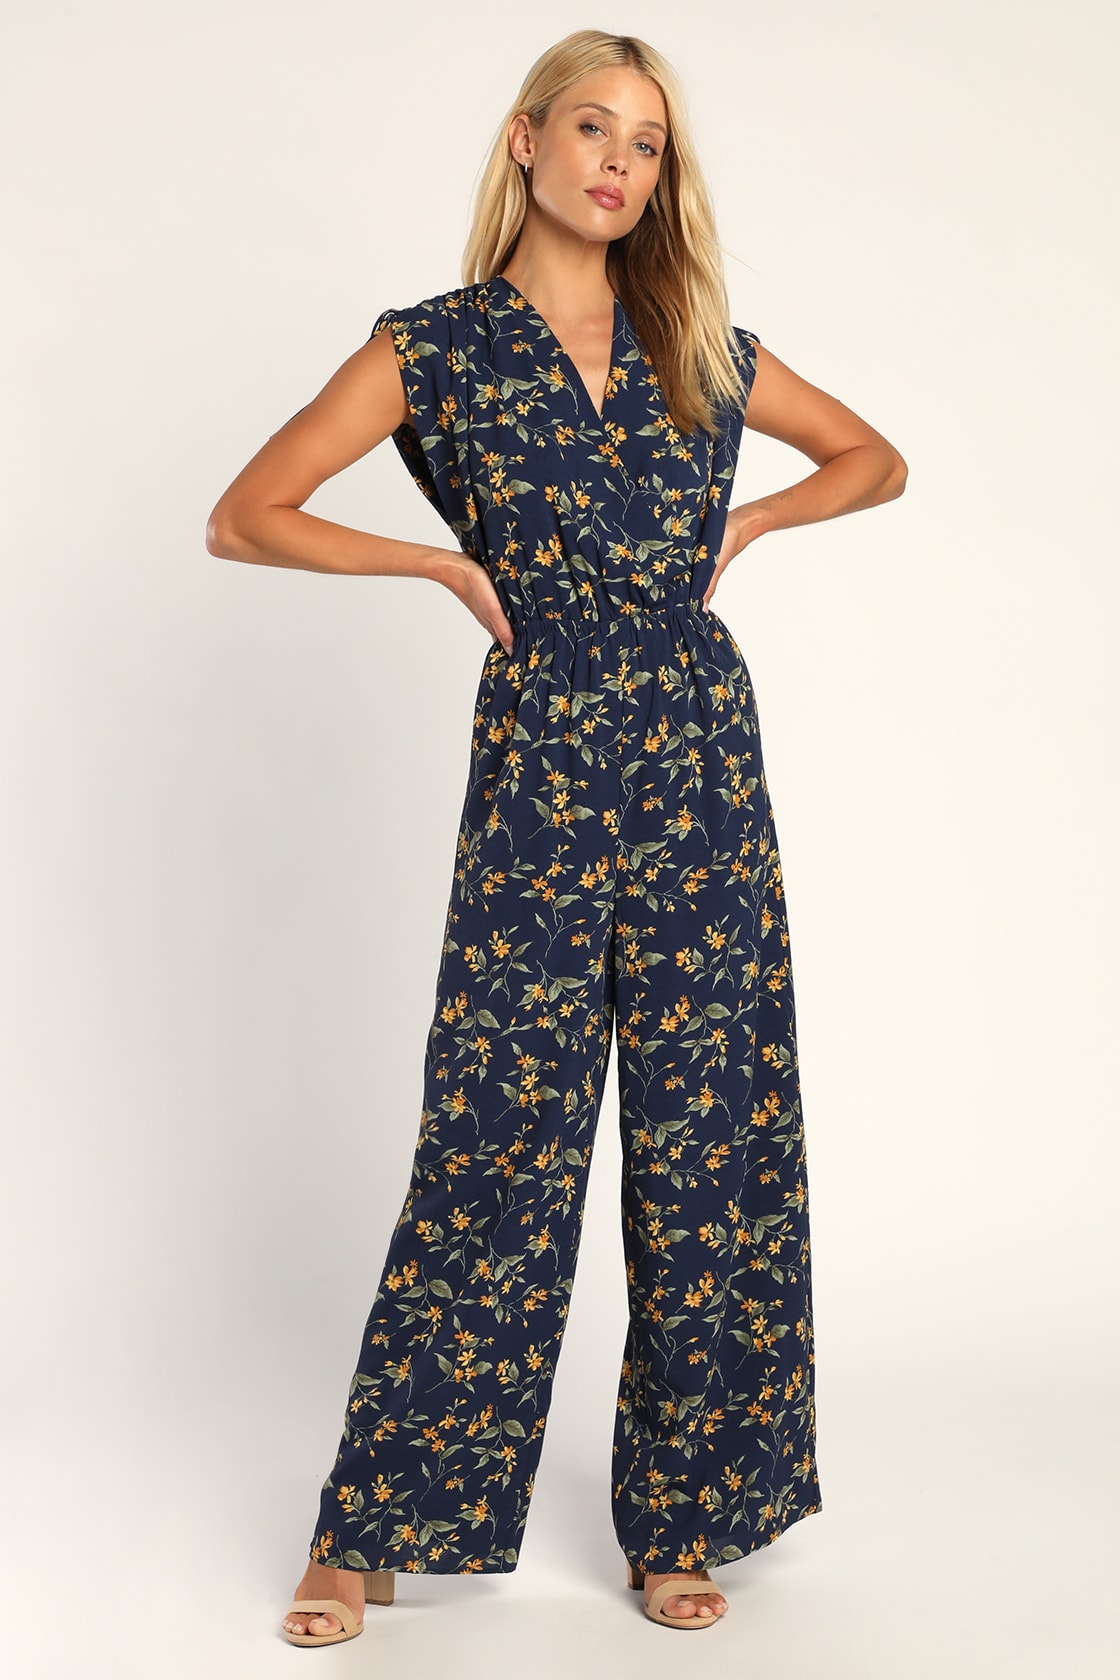 Top 10 Navy Blue Jumpsuit for Wedding Guests & Bridesmaids